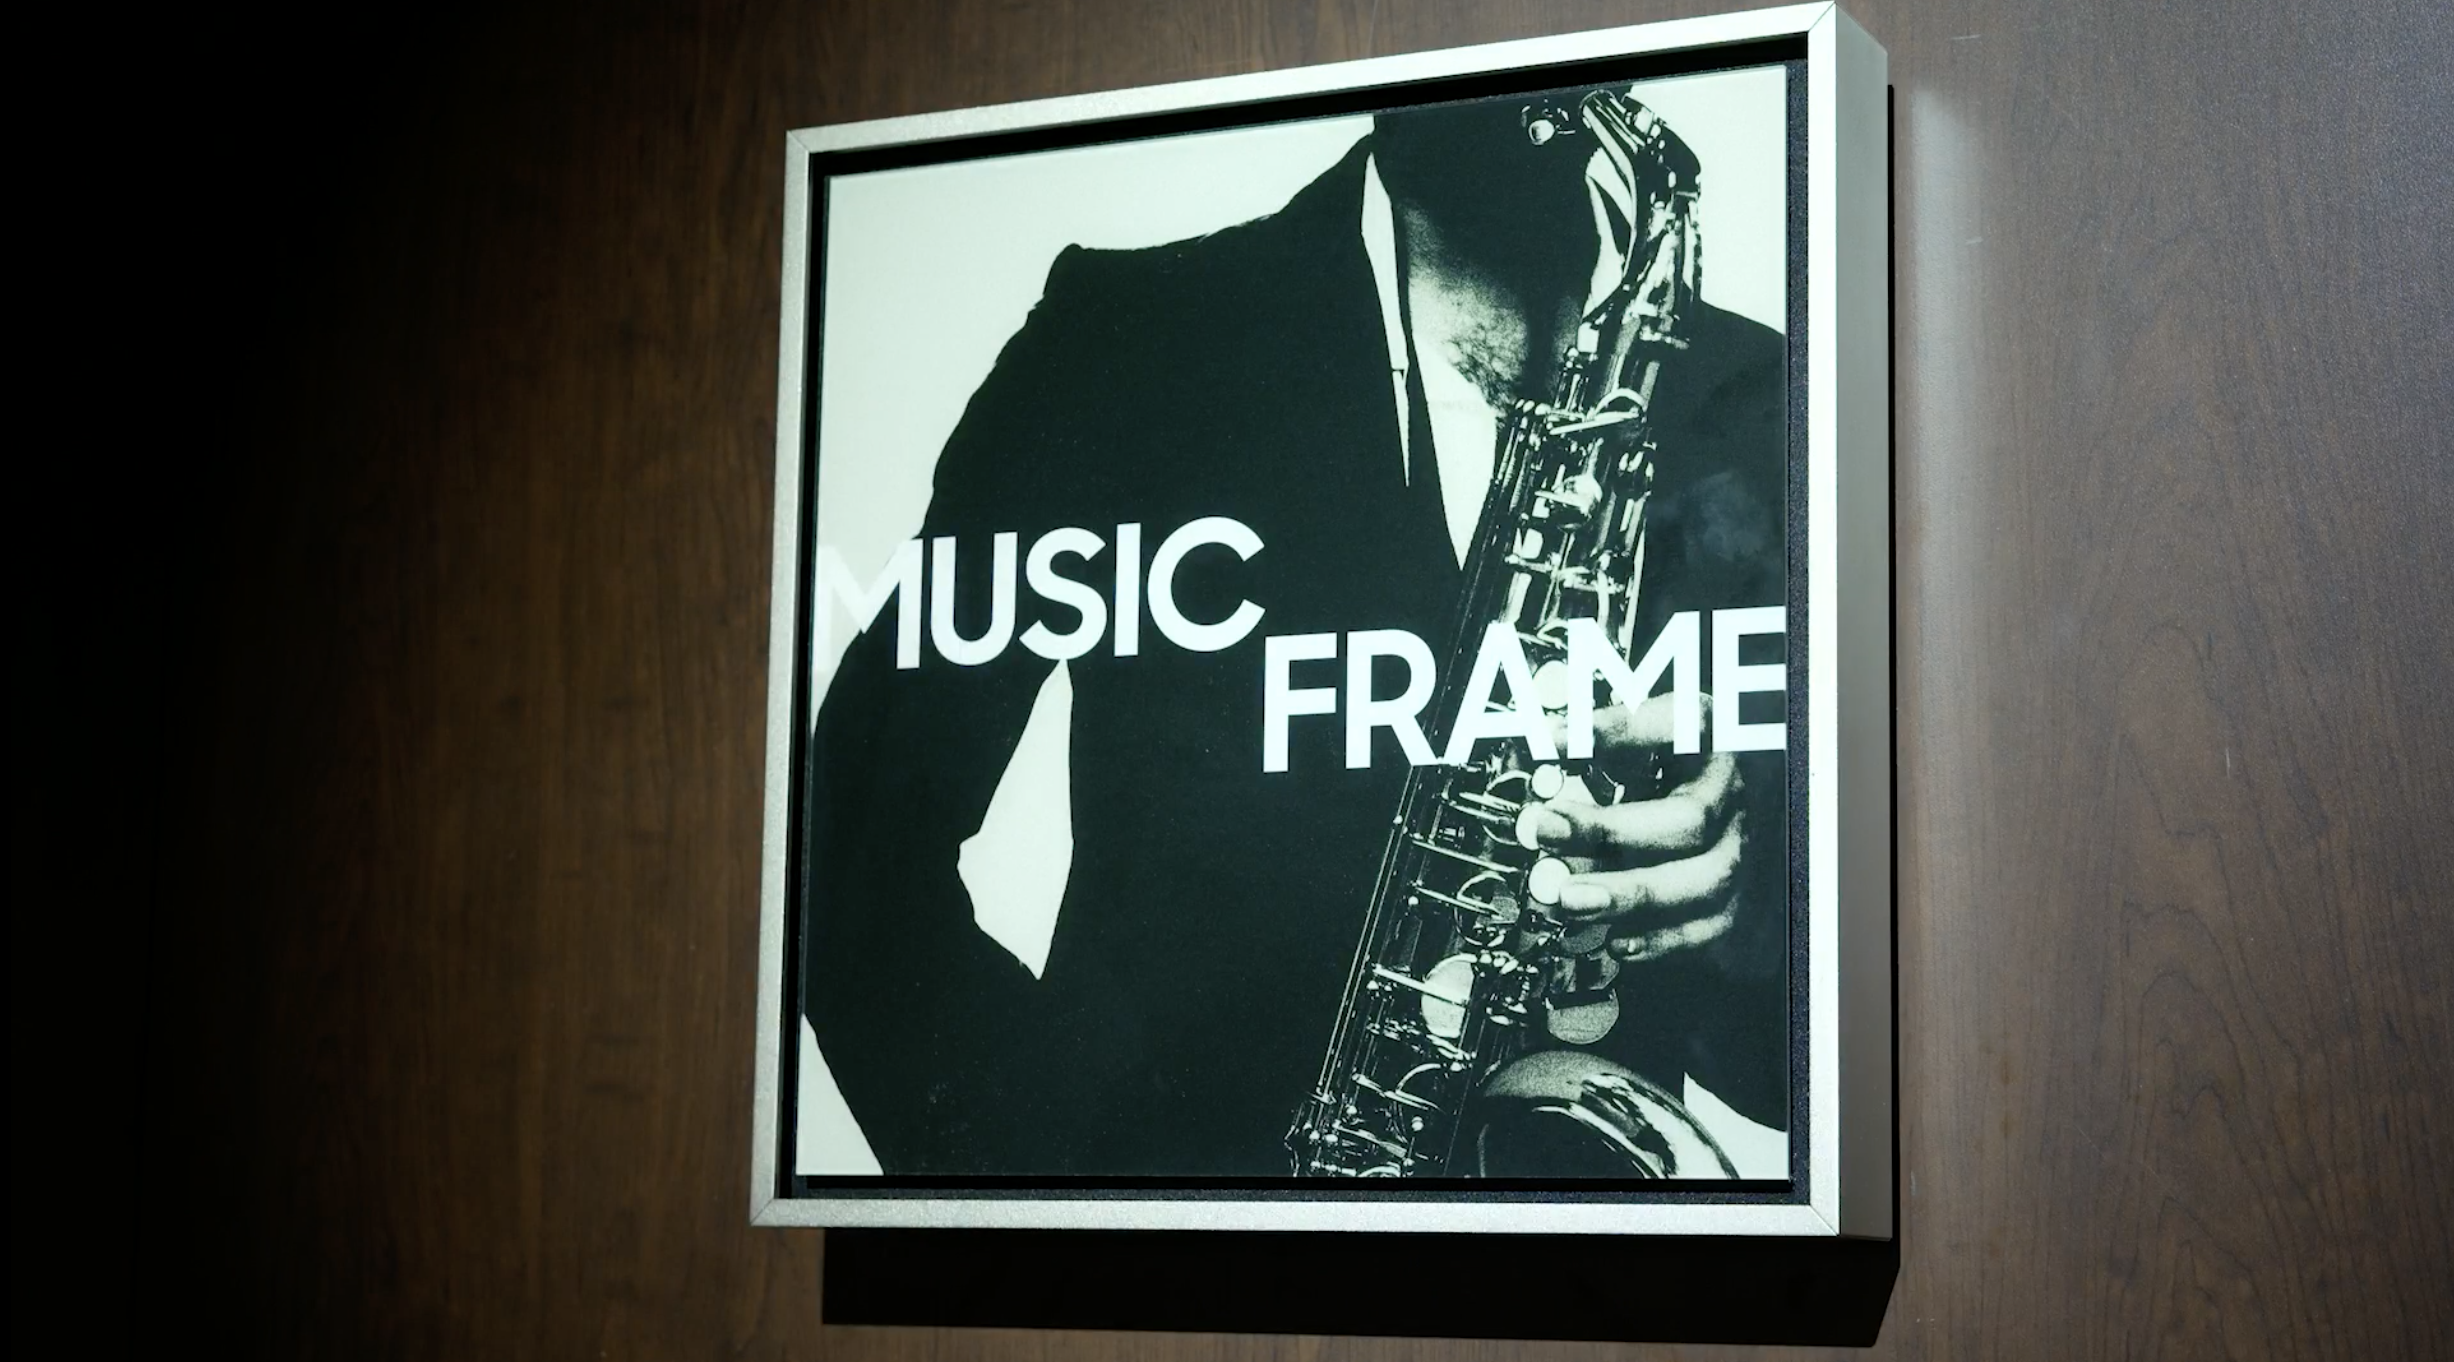 Samsung Music Frame speaker with a saxophone player image, on dark wooden wall